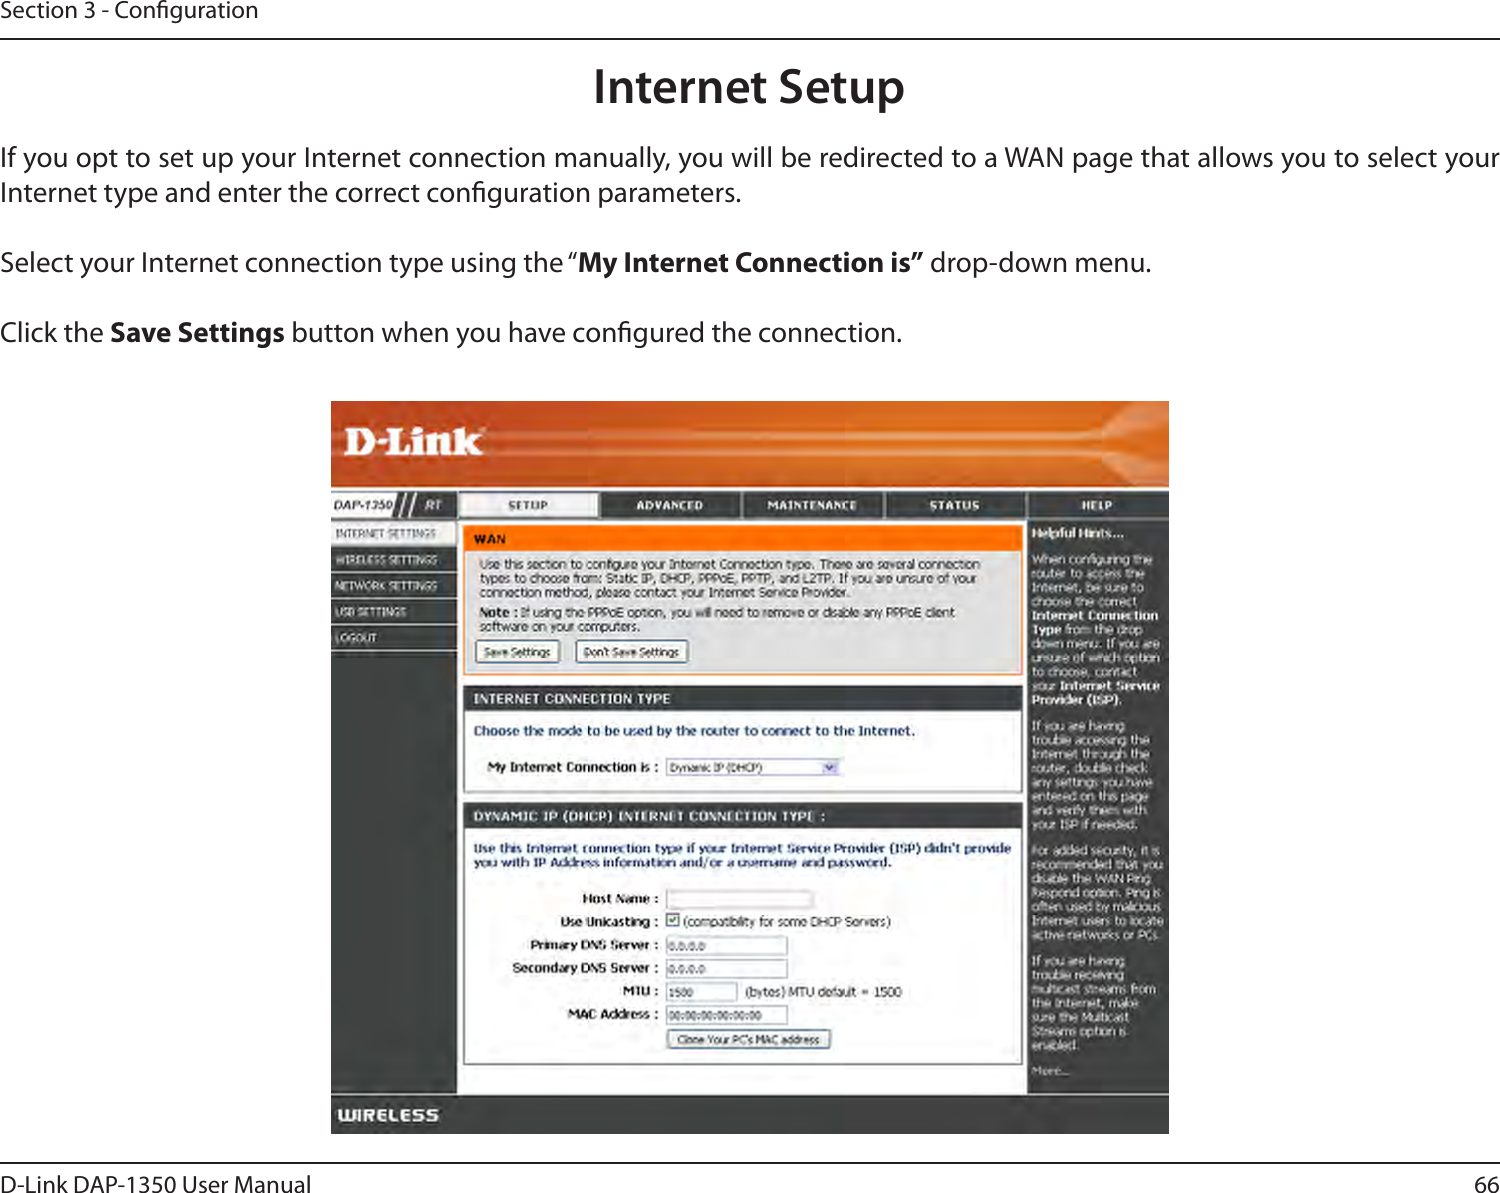 66D-Link DAP-1350 User ManualSection 3 - CongurationInternet SetupIf you opt to set up your Internet connection manually, you will be redirected to a WAN page that allows you to select your Internet type and enter the correct conguration parameters.Select your Internet connection type using the “My Internet Connection is” drop-down menu.Click the Save Settings button when you have congured the connection.